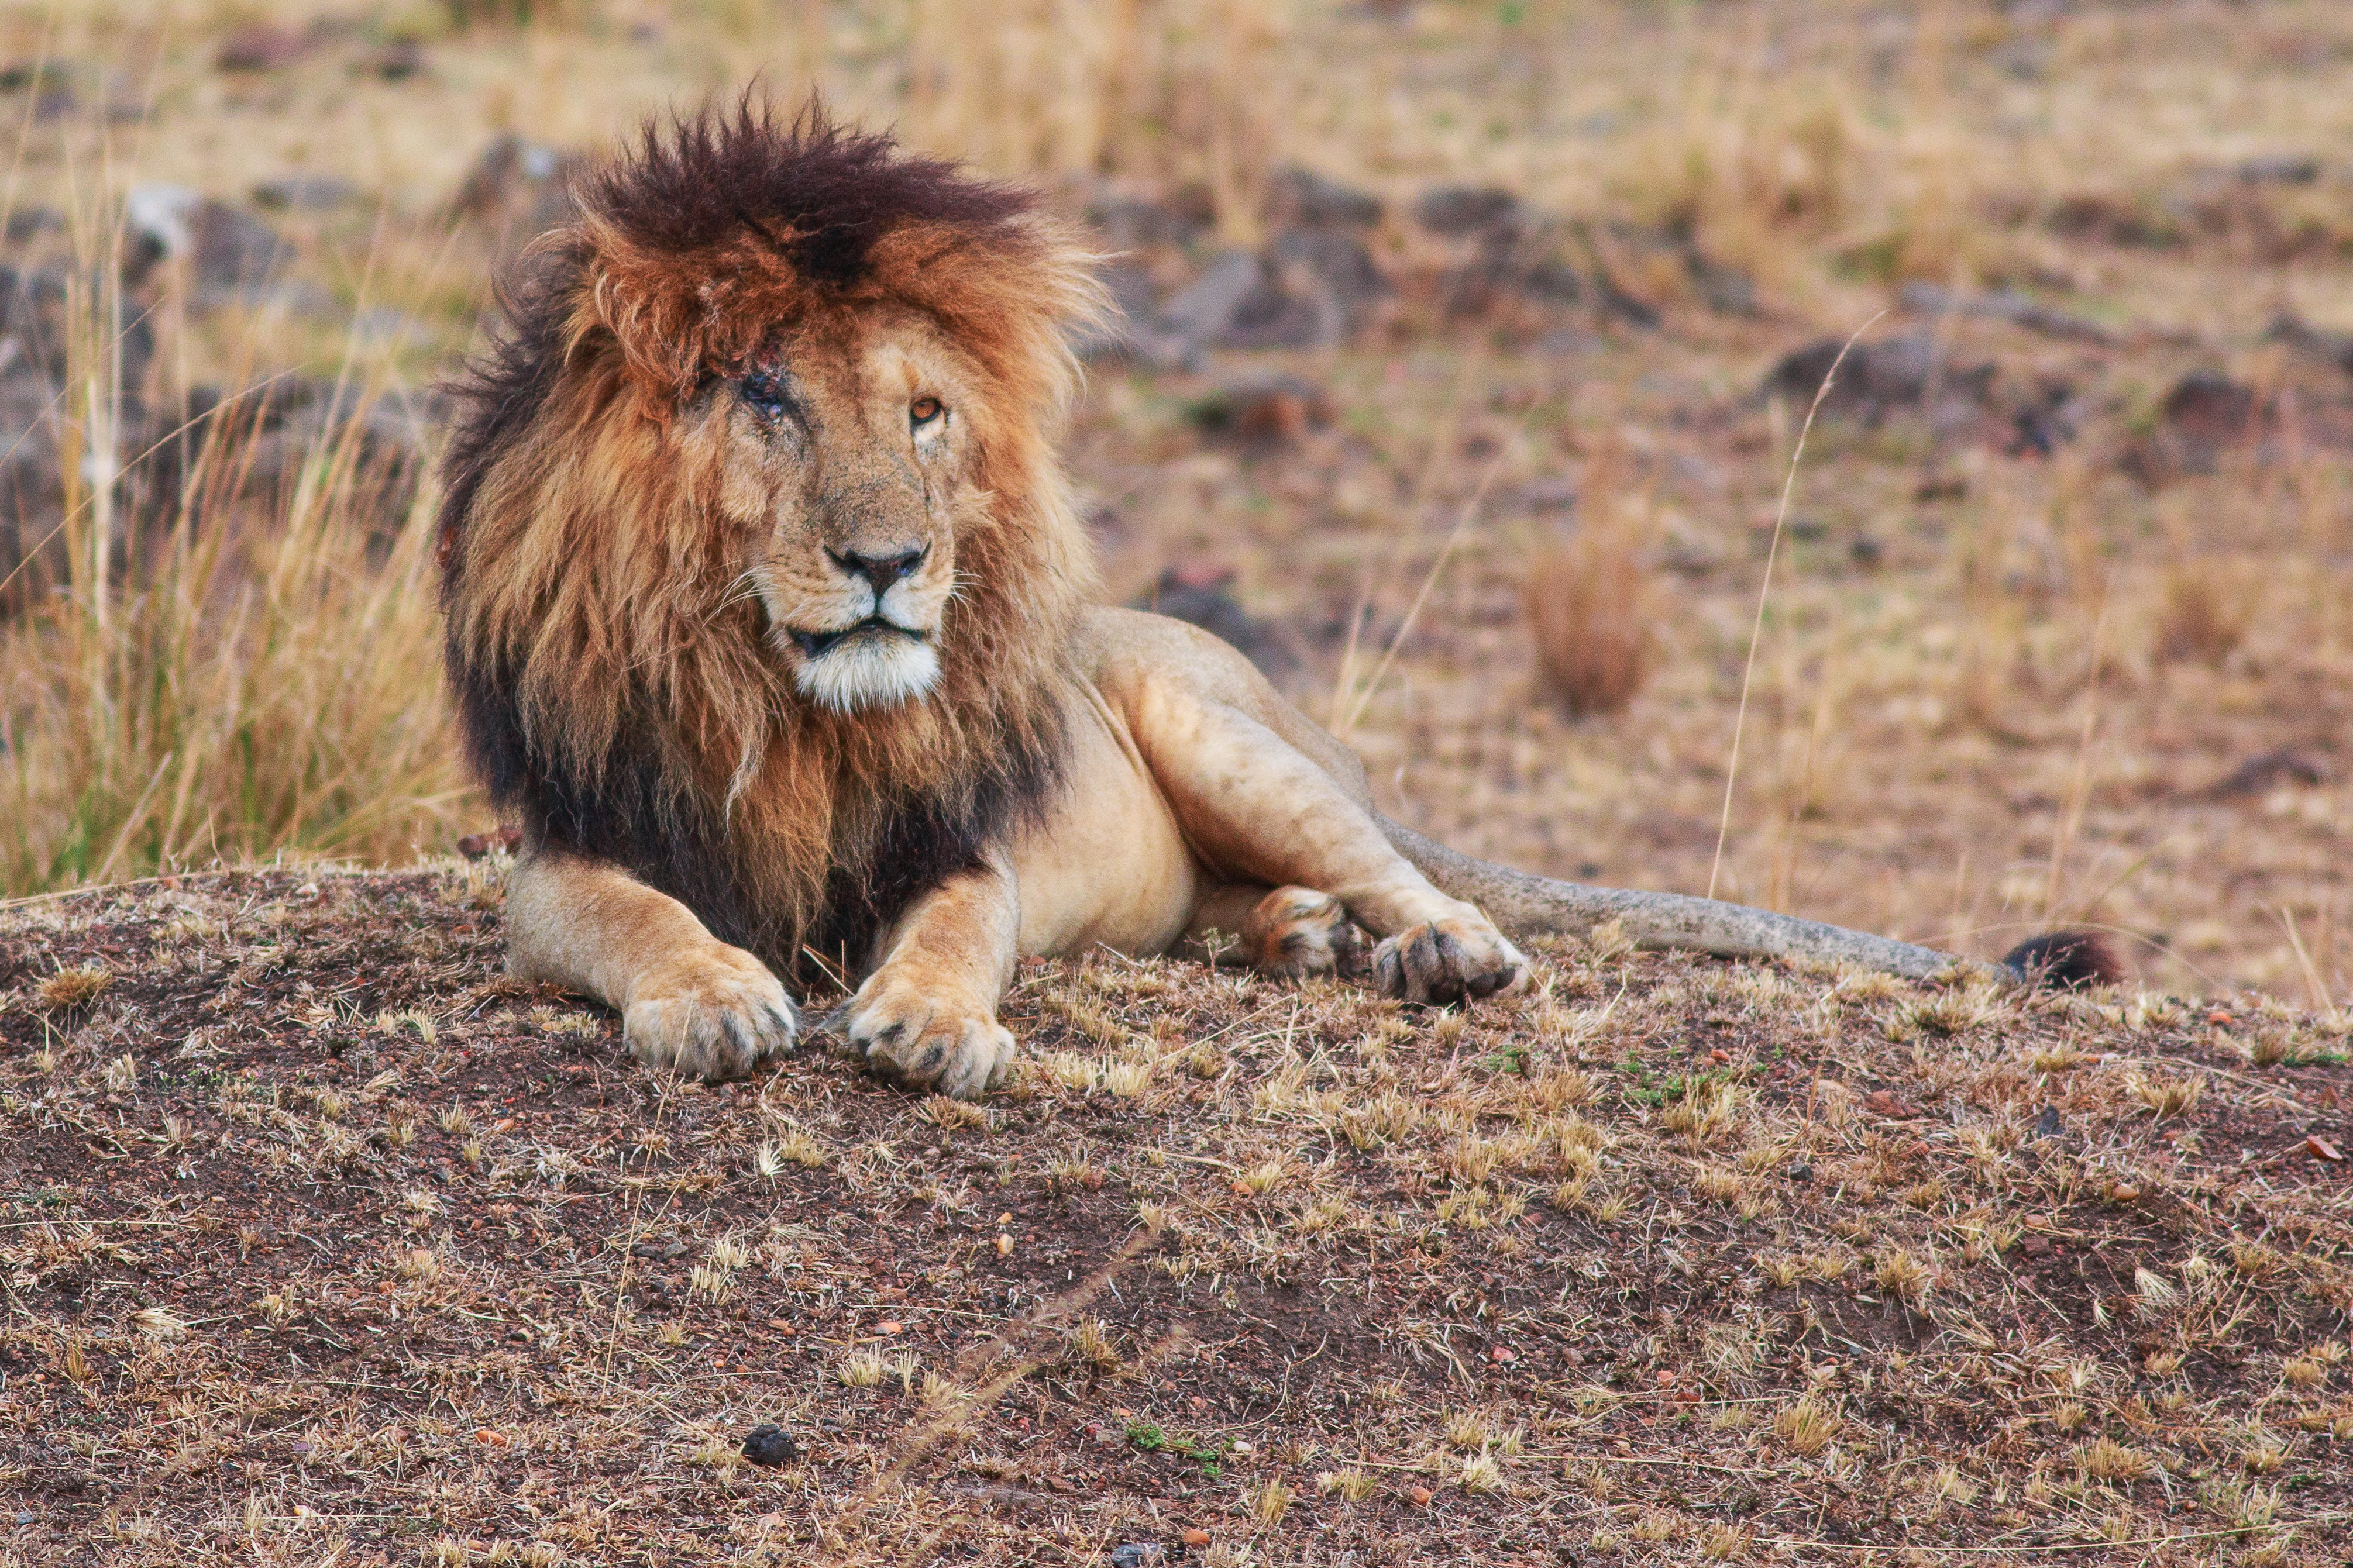 Scarface the lion, in the Maasai Mara Game Reserve in 2018